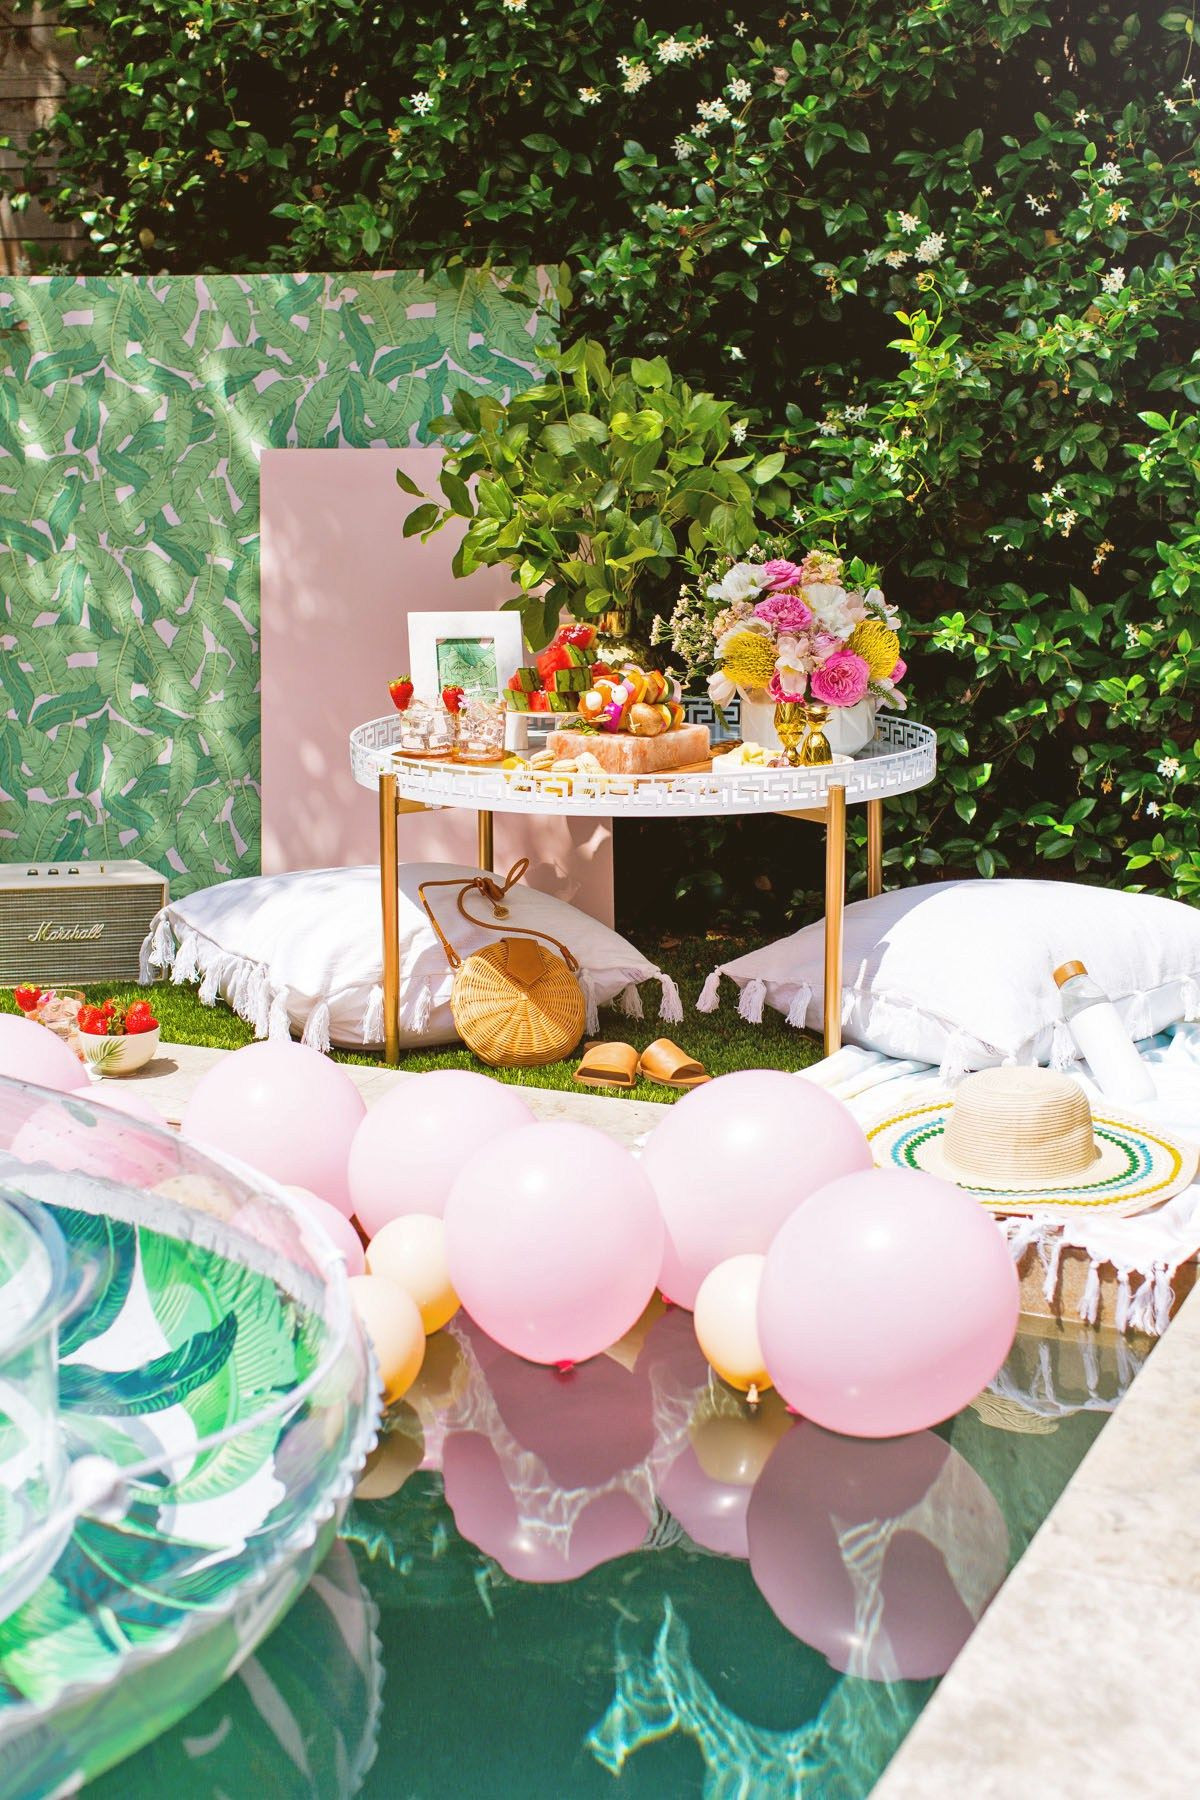 Poolside Party Decoration Ideas
 Luxe Poolside Entertaining